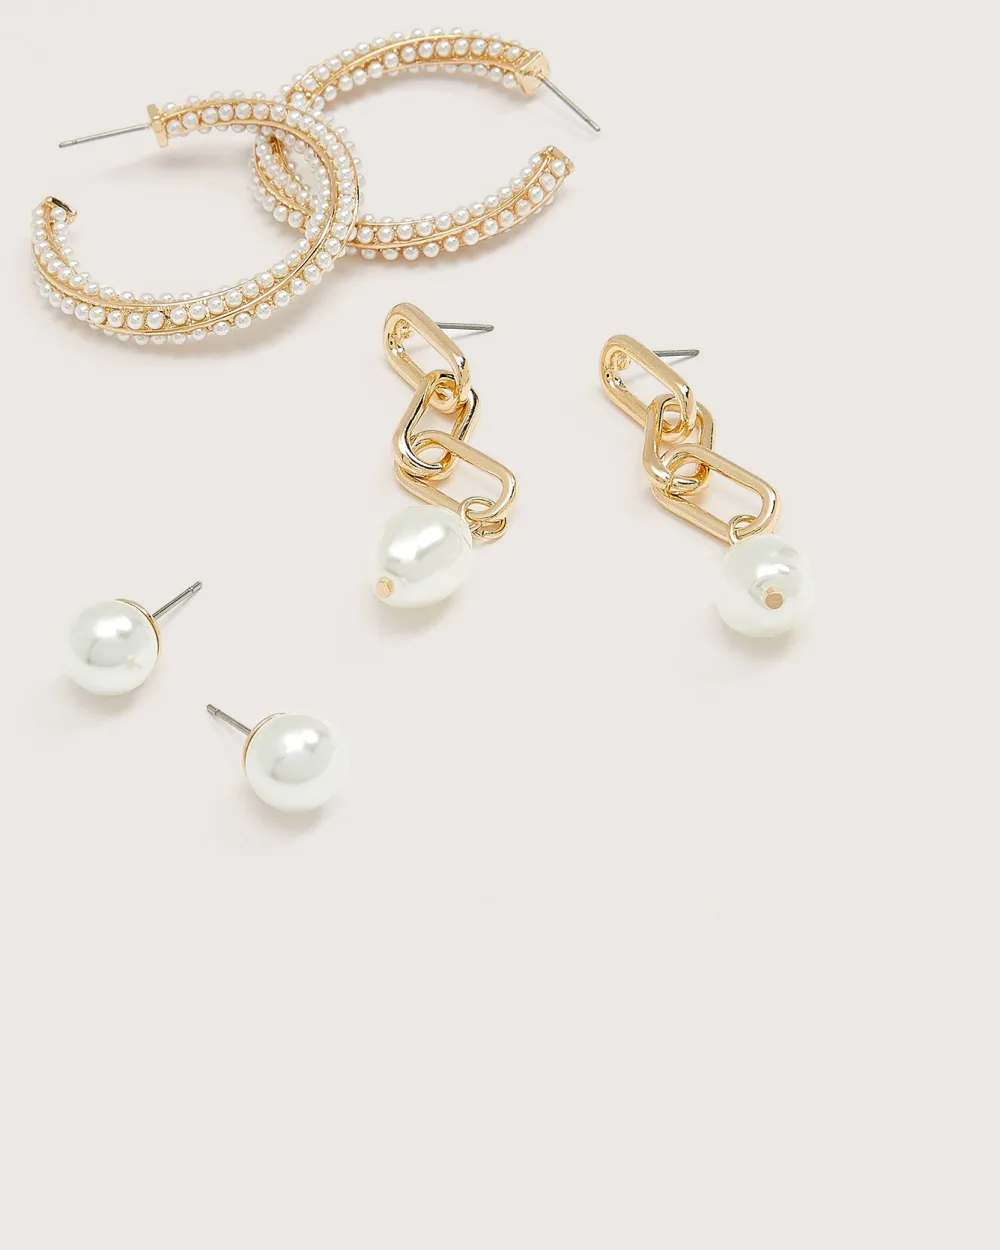 Assorted Golden Pearl Earrings, Set of 3 - Addition Elle